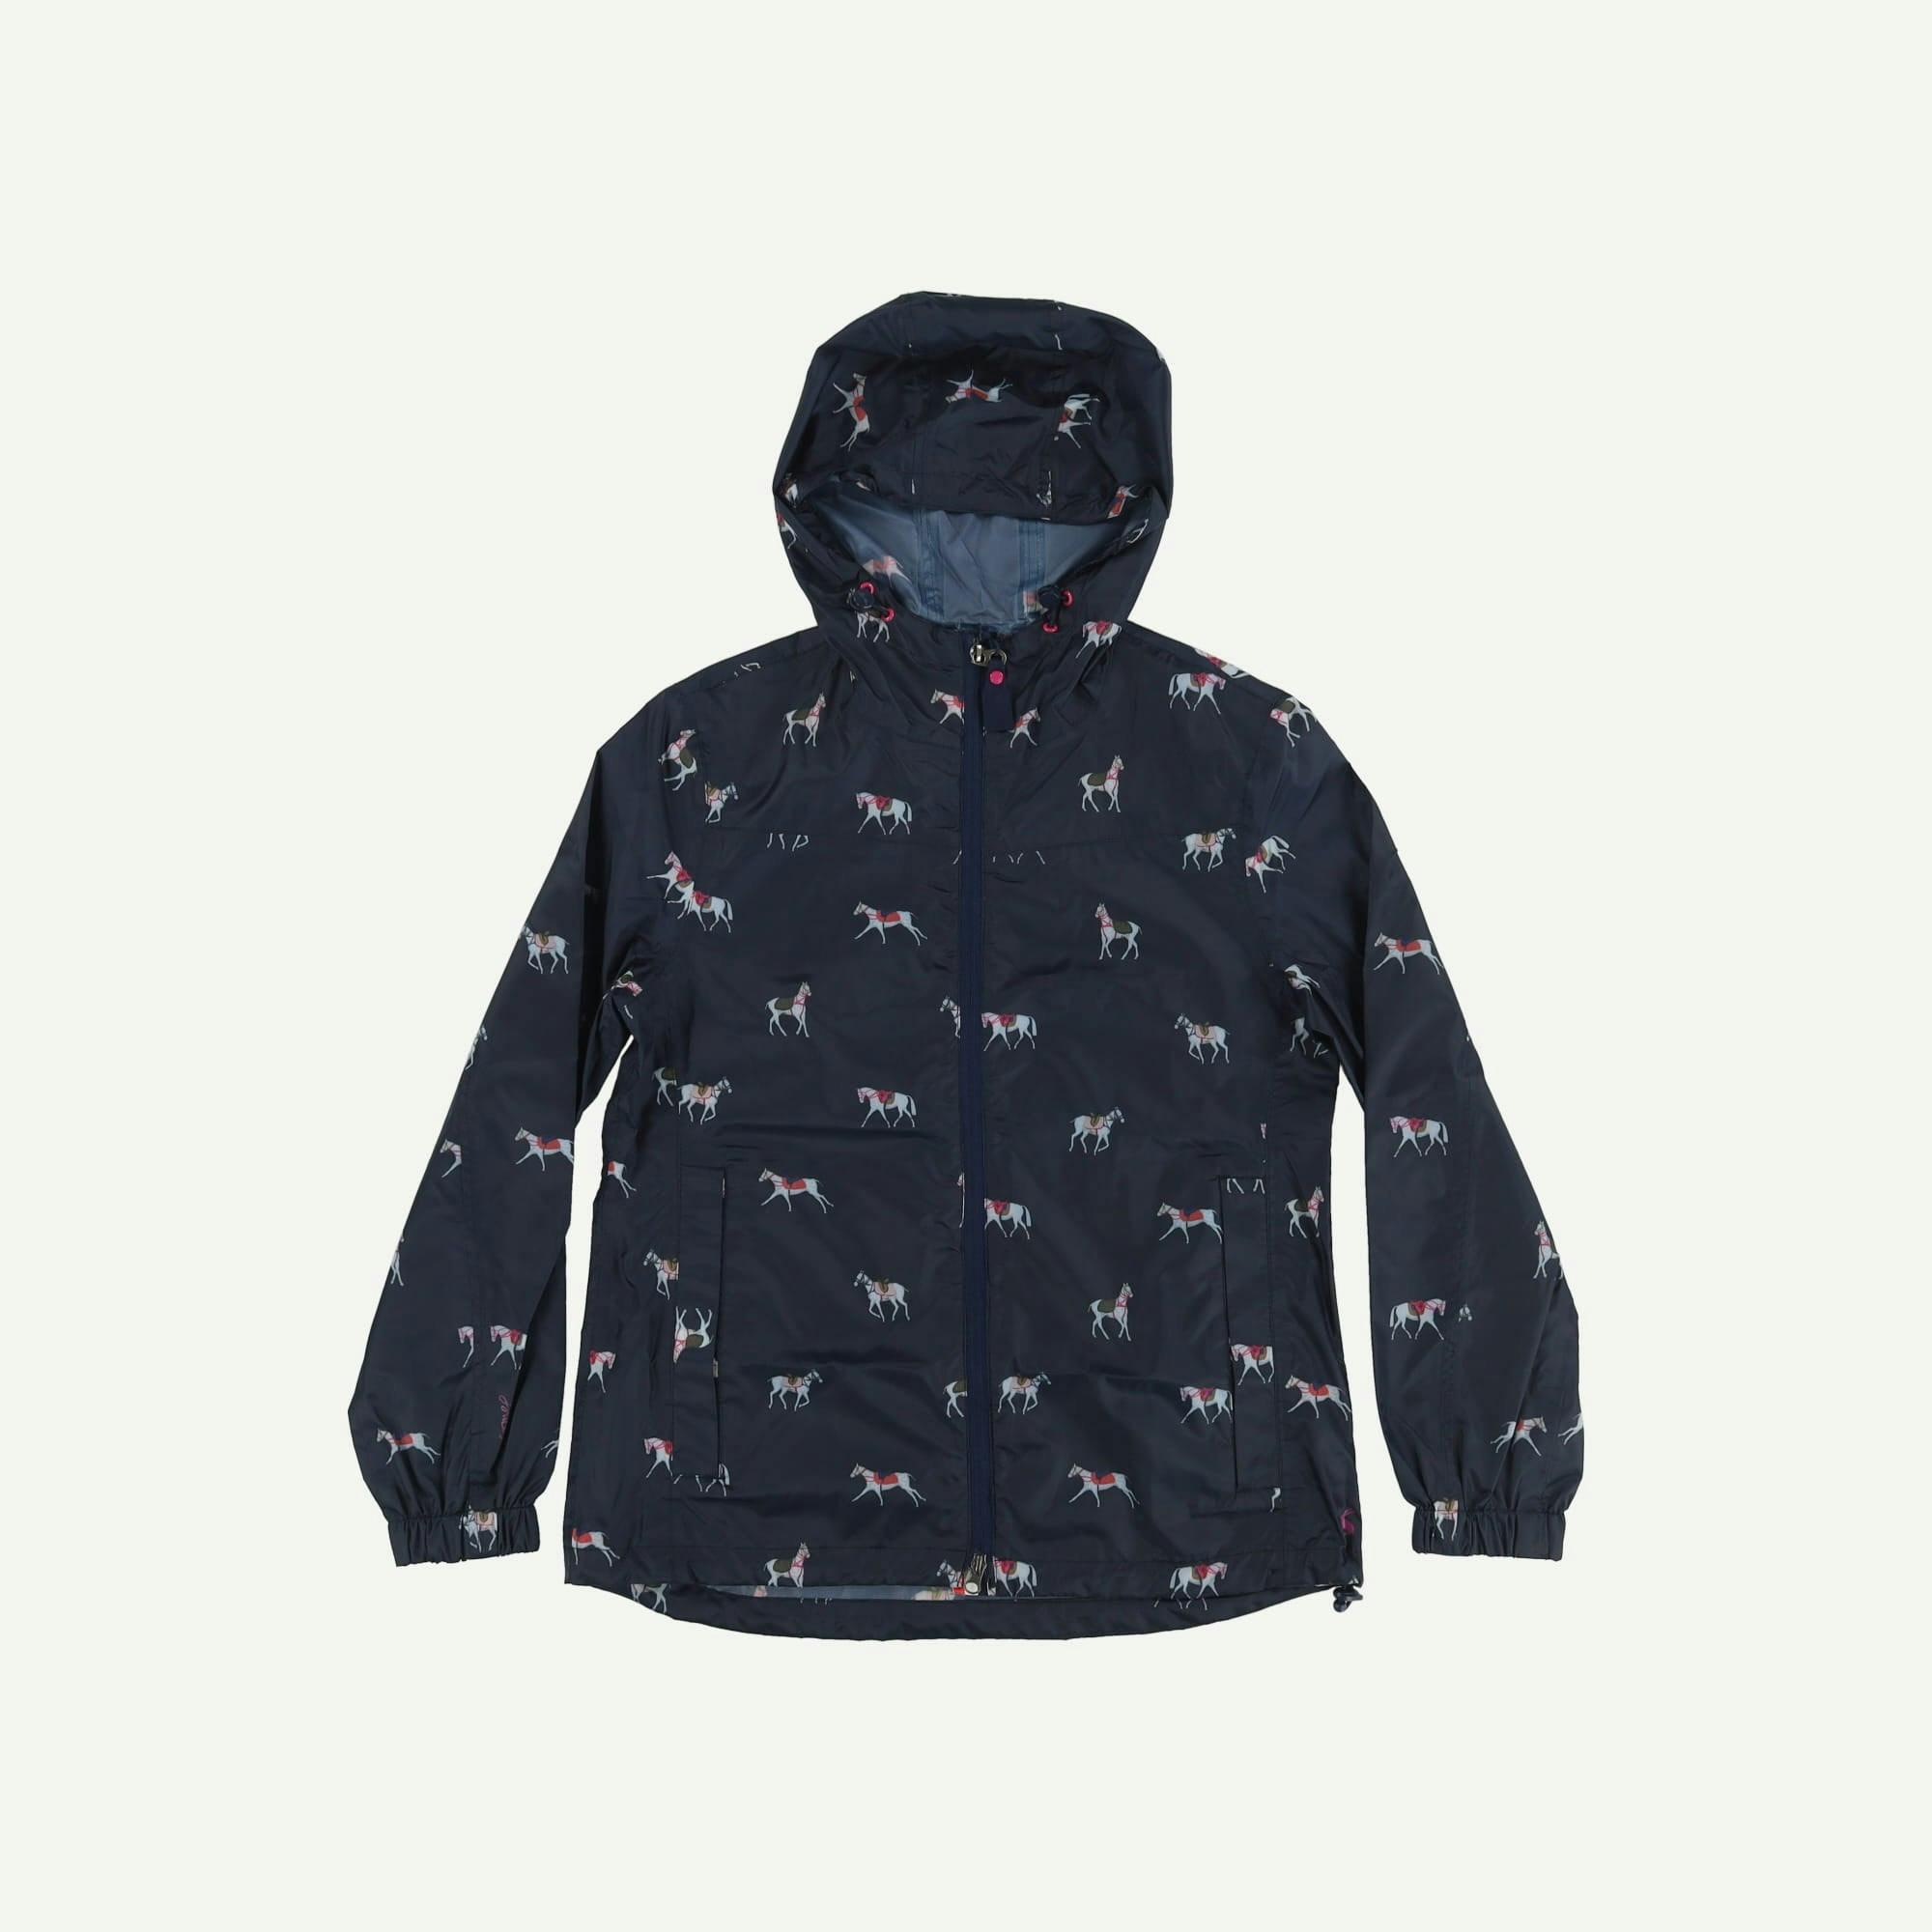 Joules As new Navy Coat